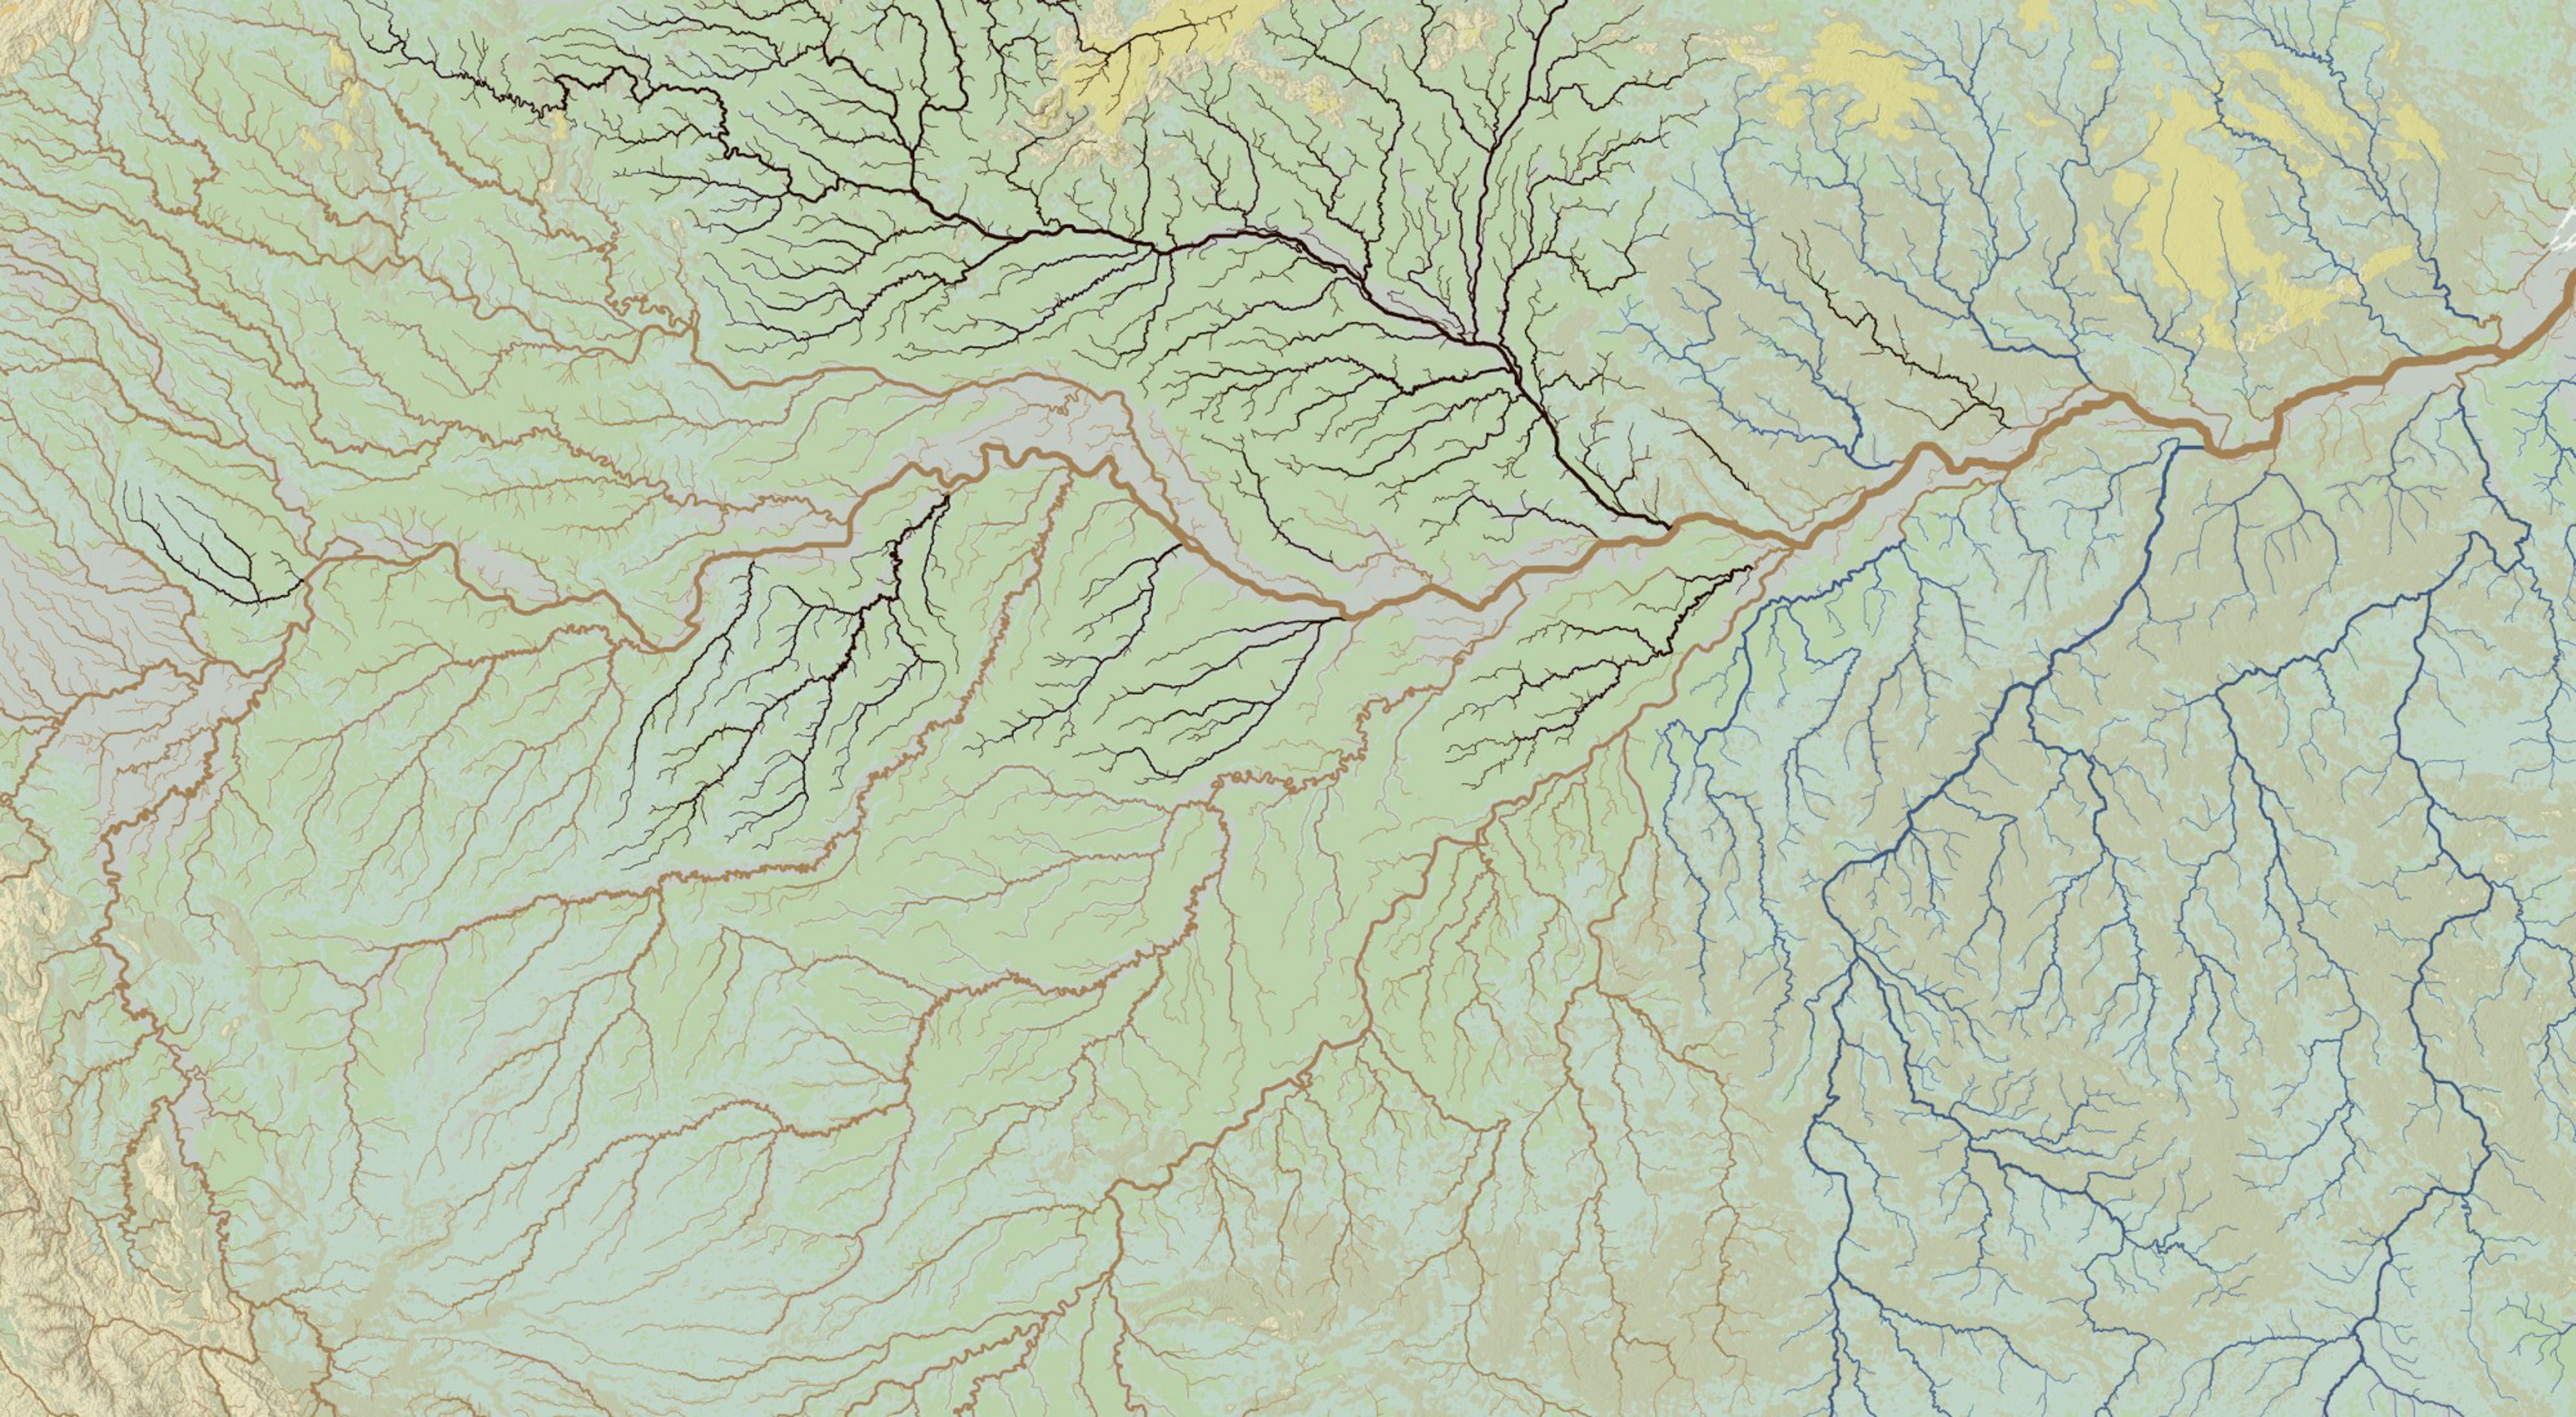 Geospatial maps of the Amazon River network.